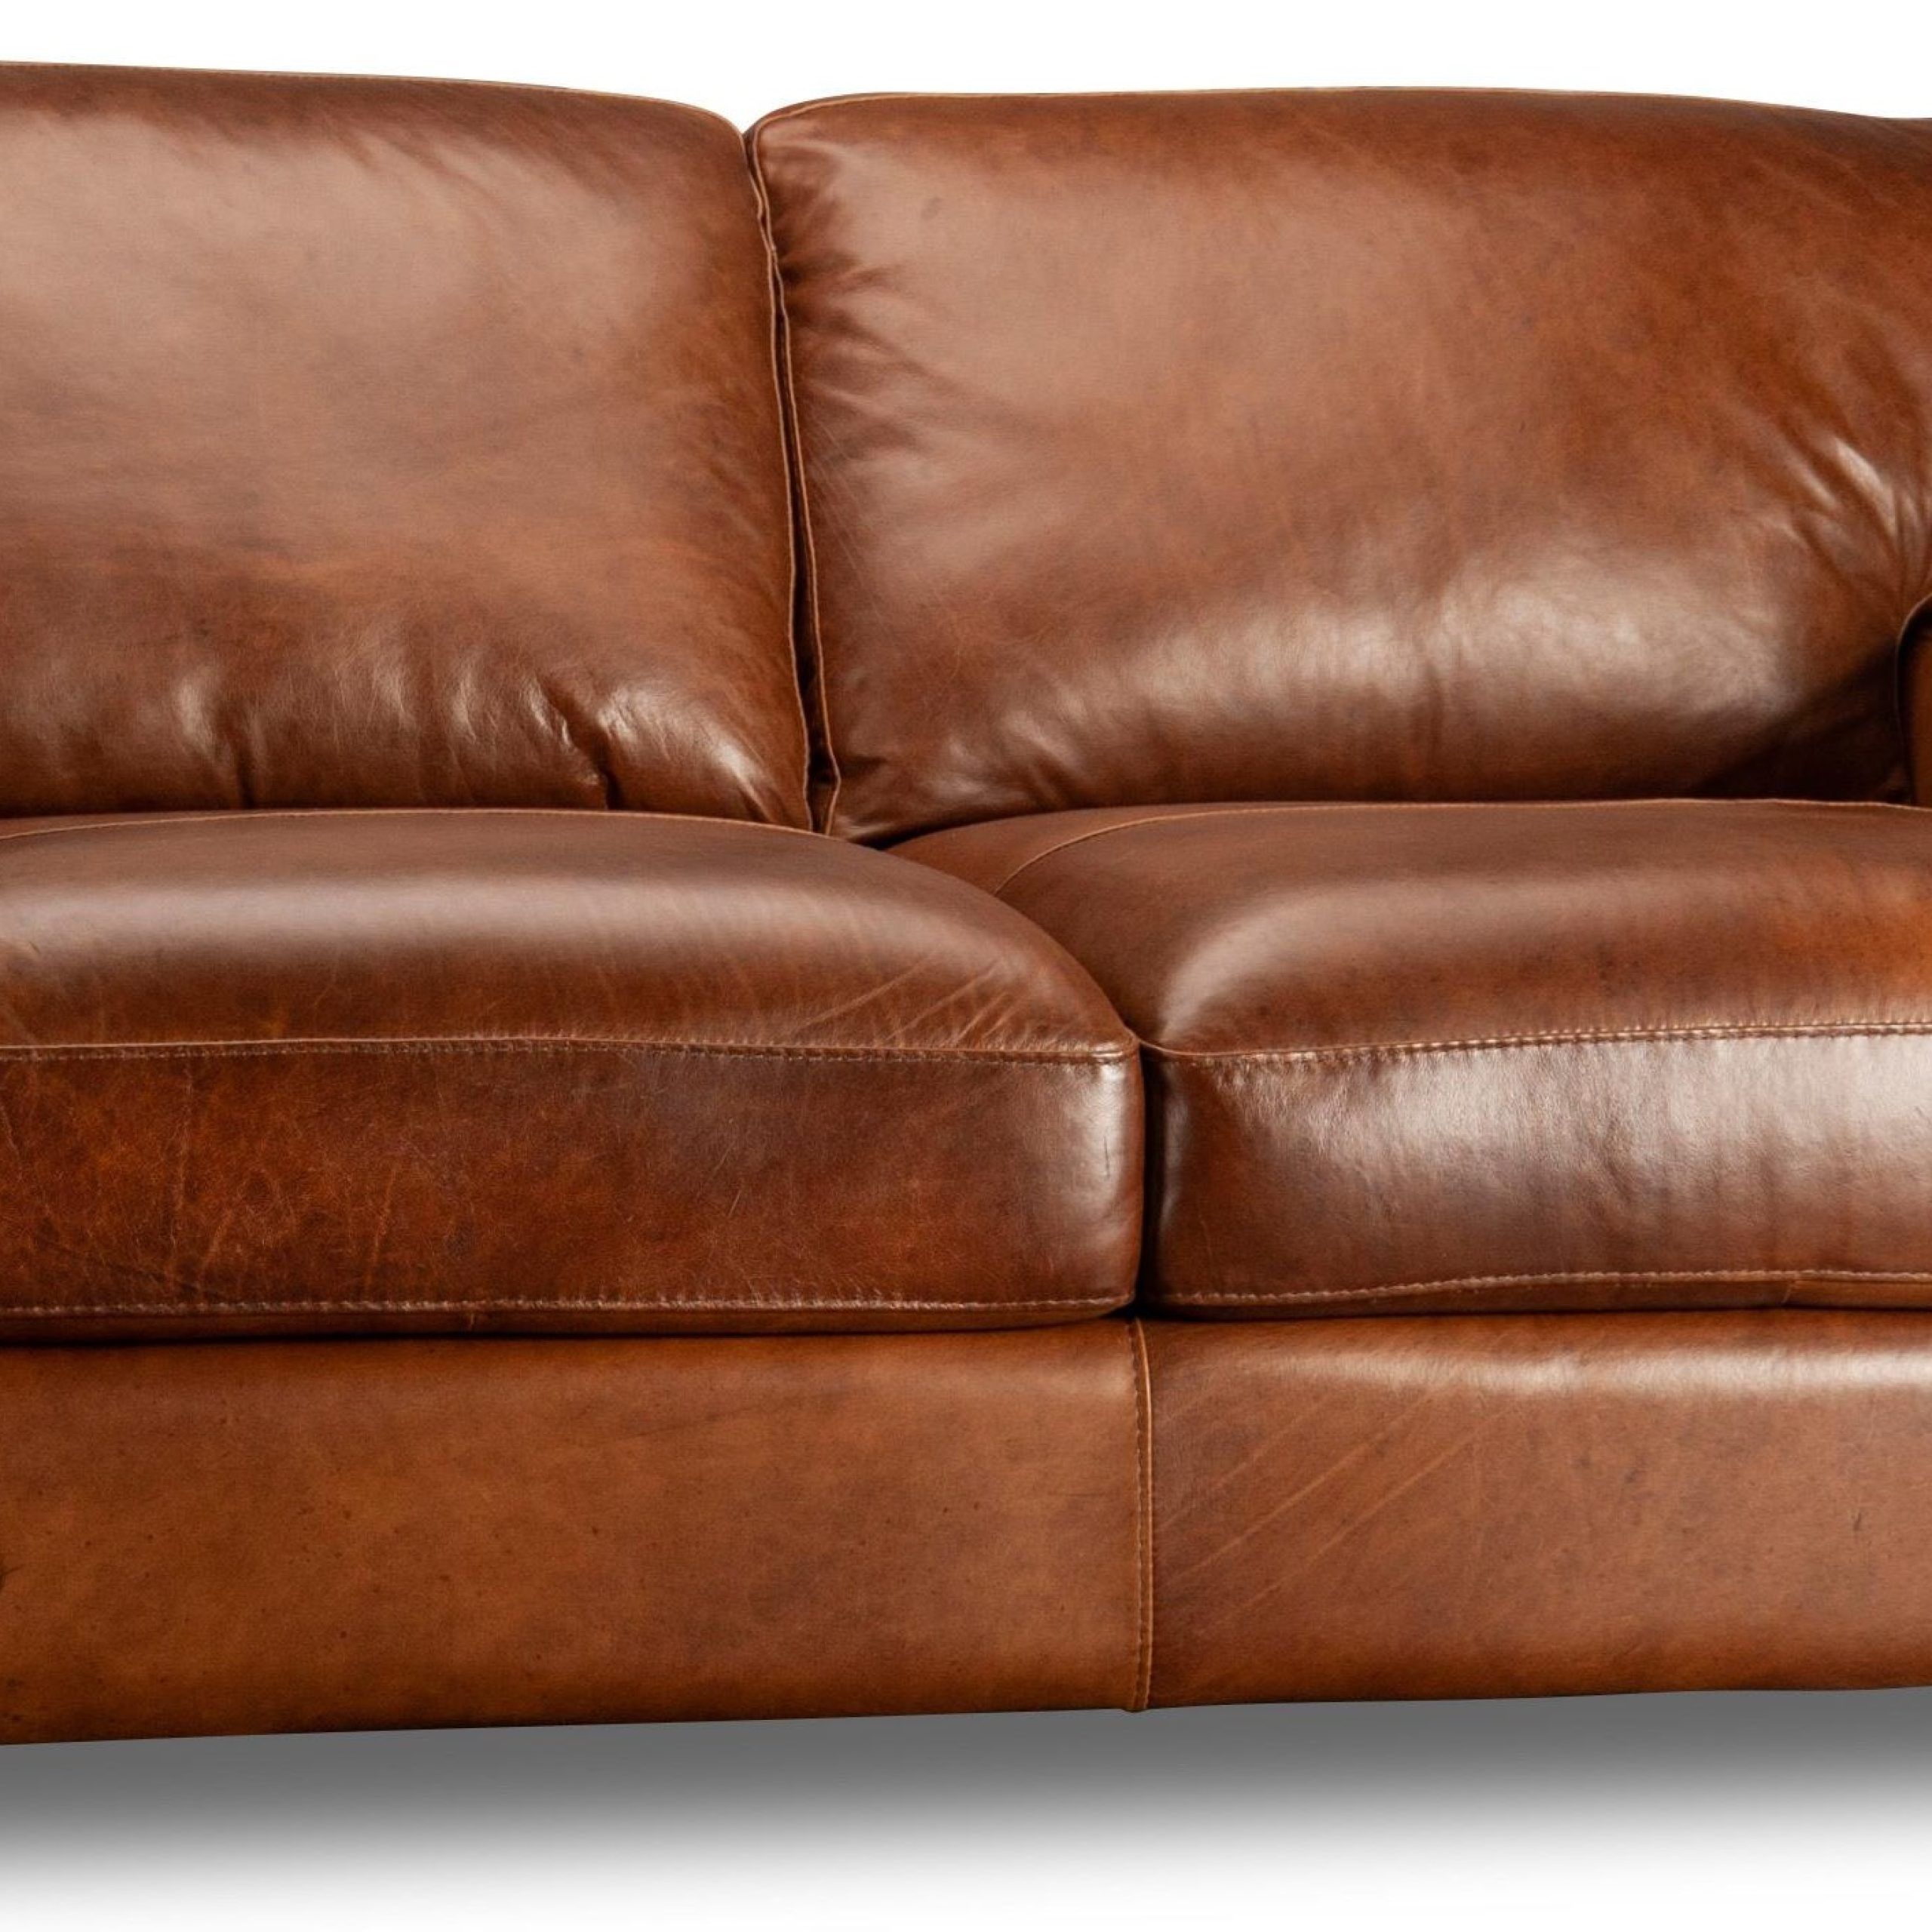 Soft Line Pietro Top Grain Leather Loveseat | Morris Home | Loveseats With Top Grain Leather Loveseats (Gallery 8 of 20)